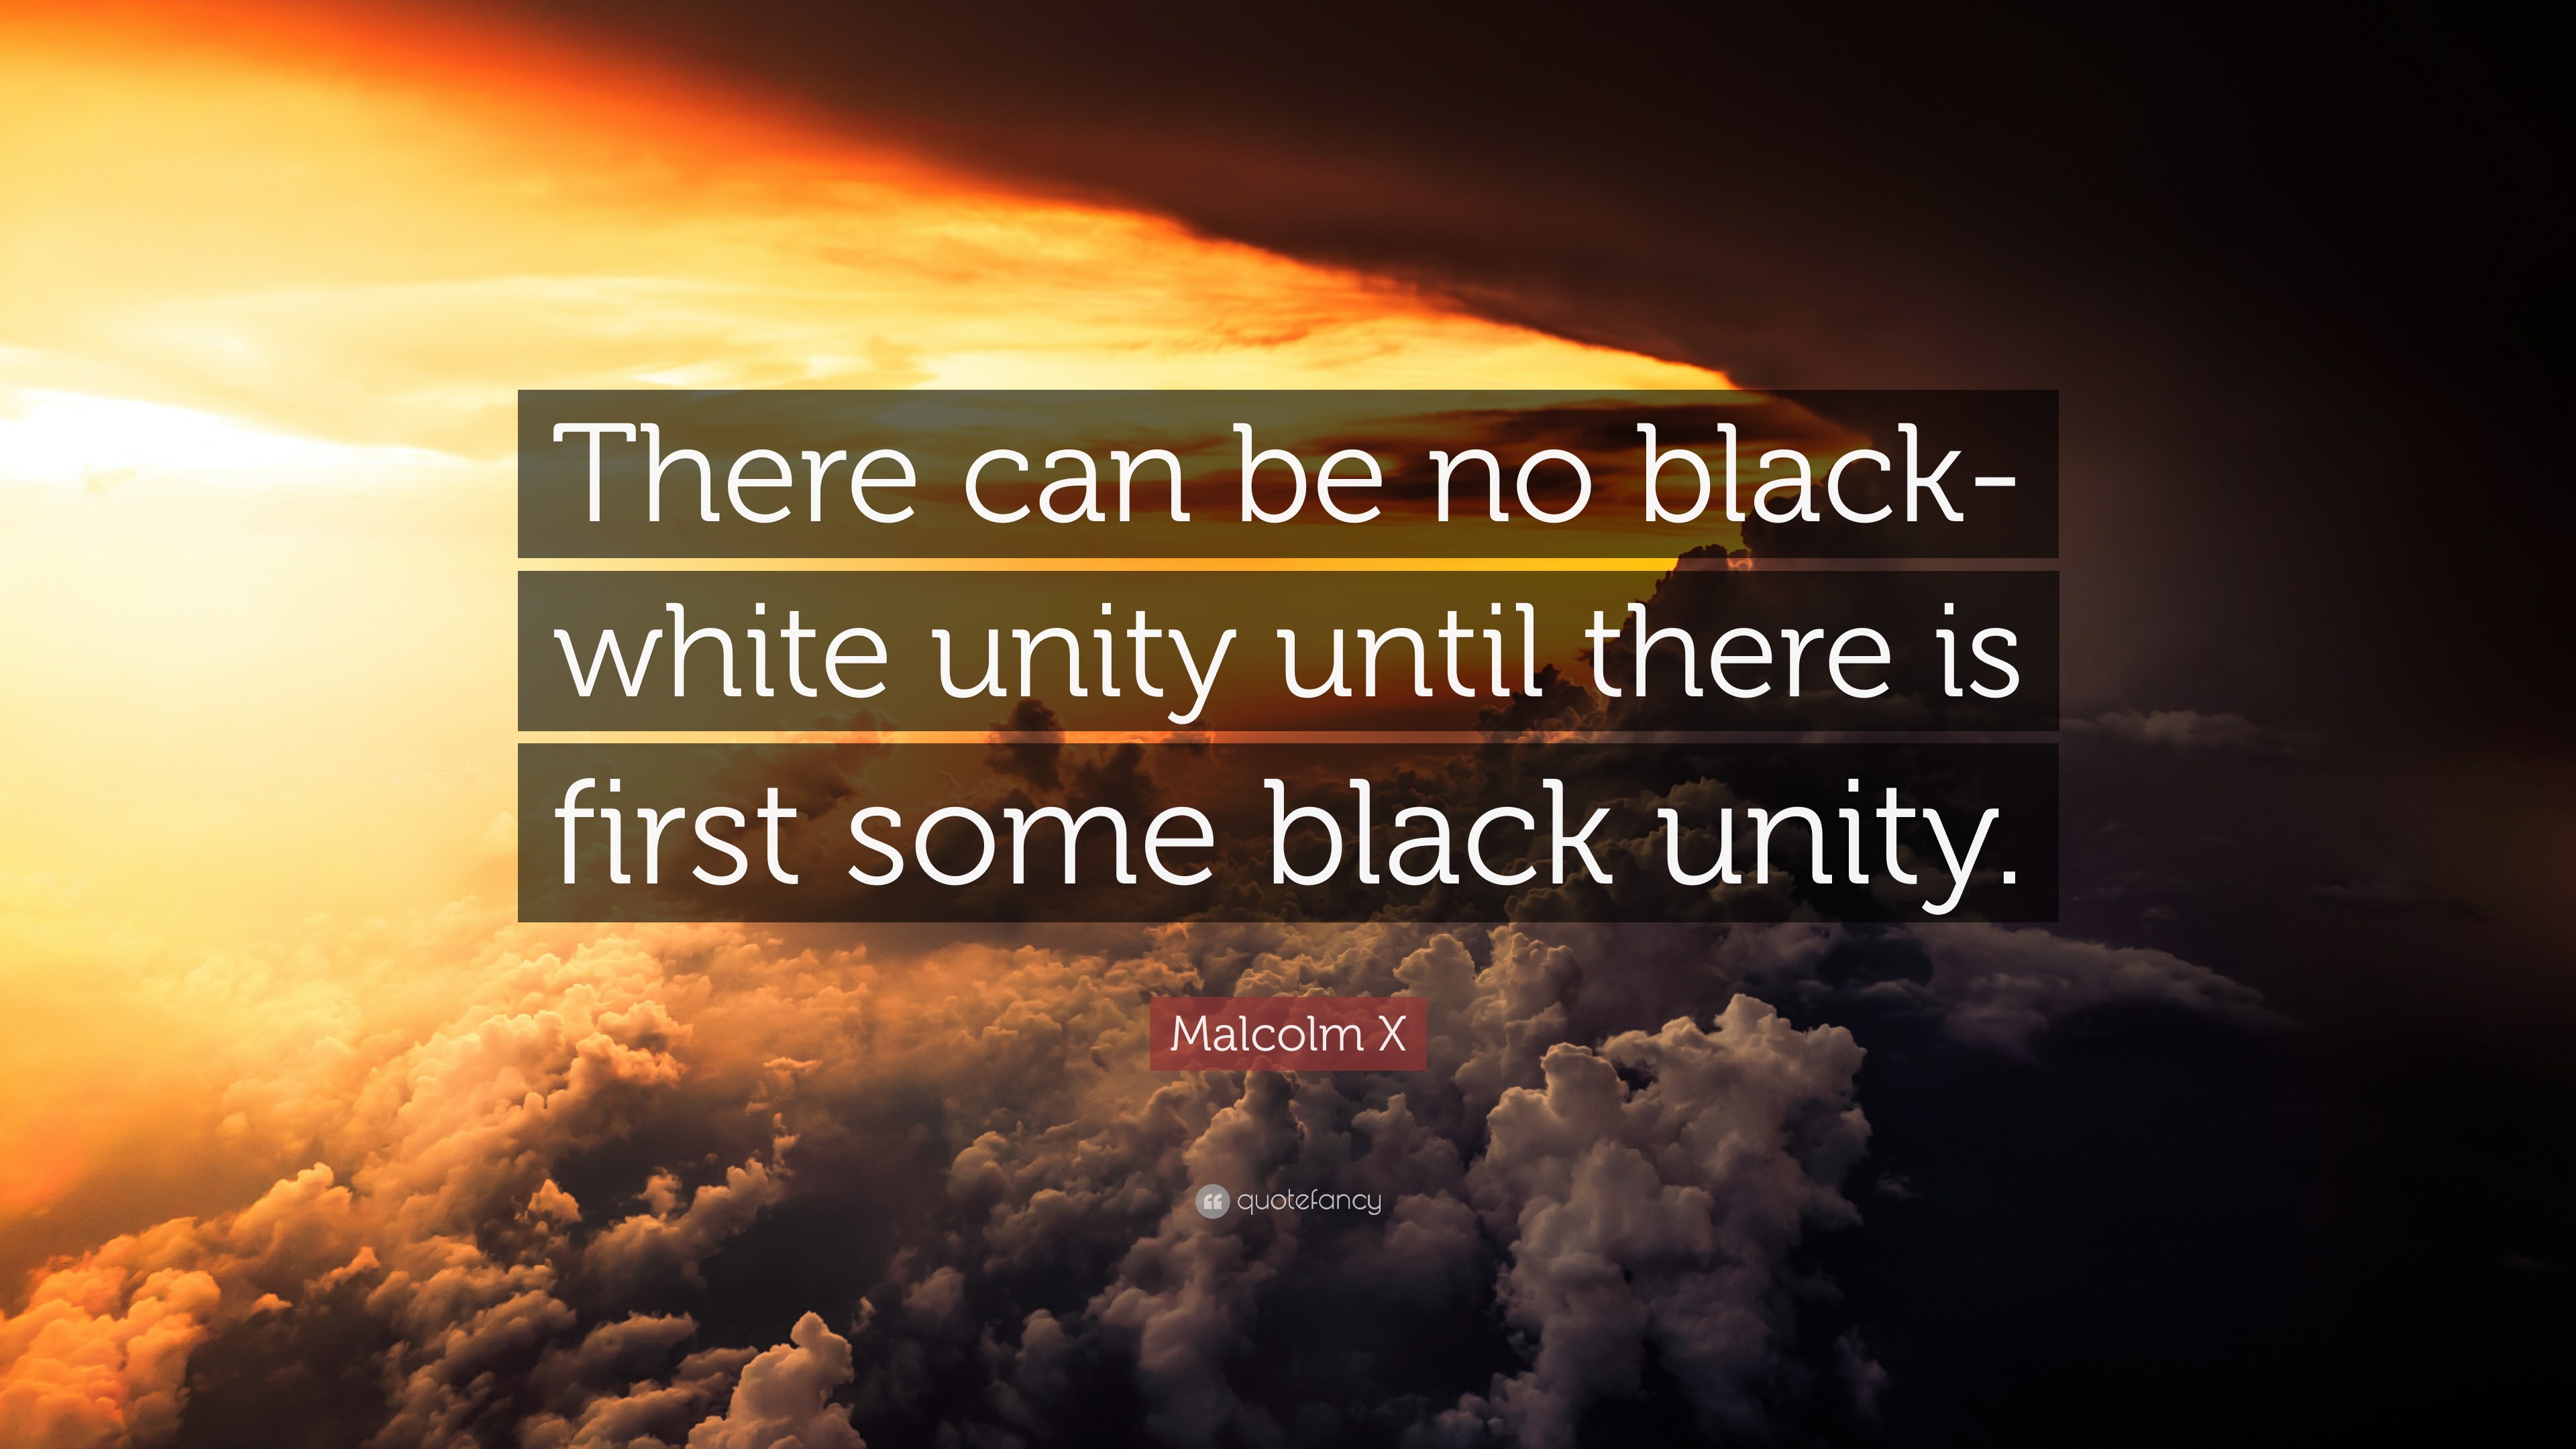 Unity quotes images - Wasys